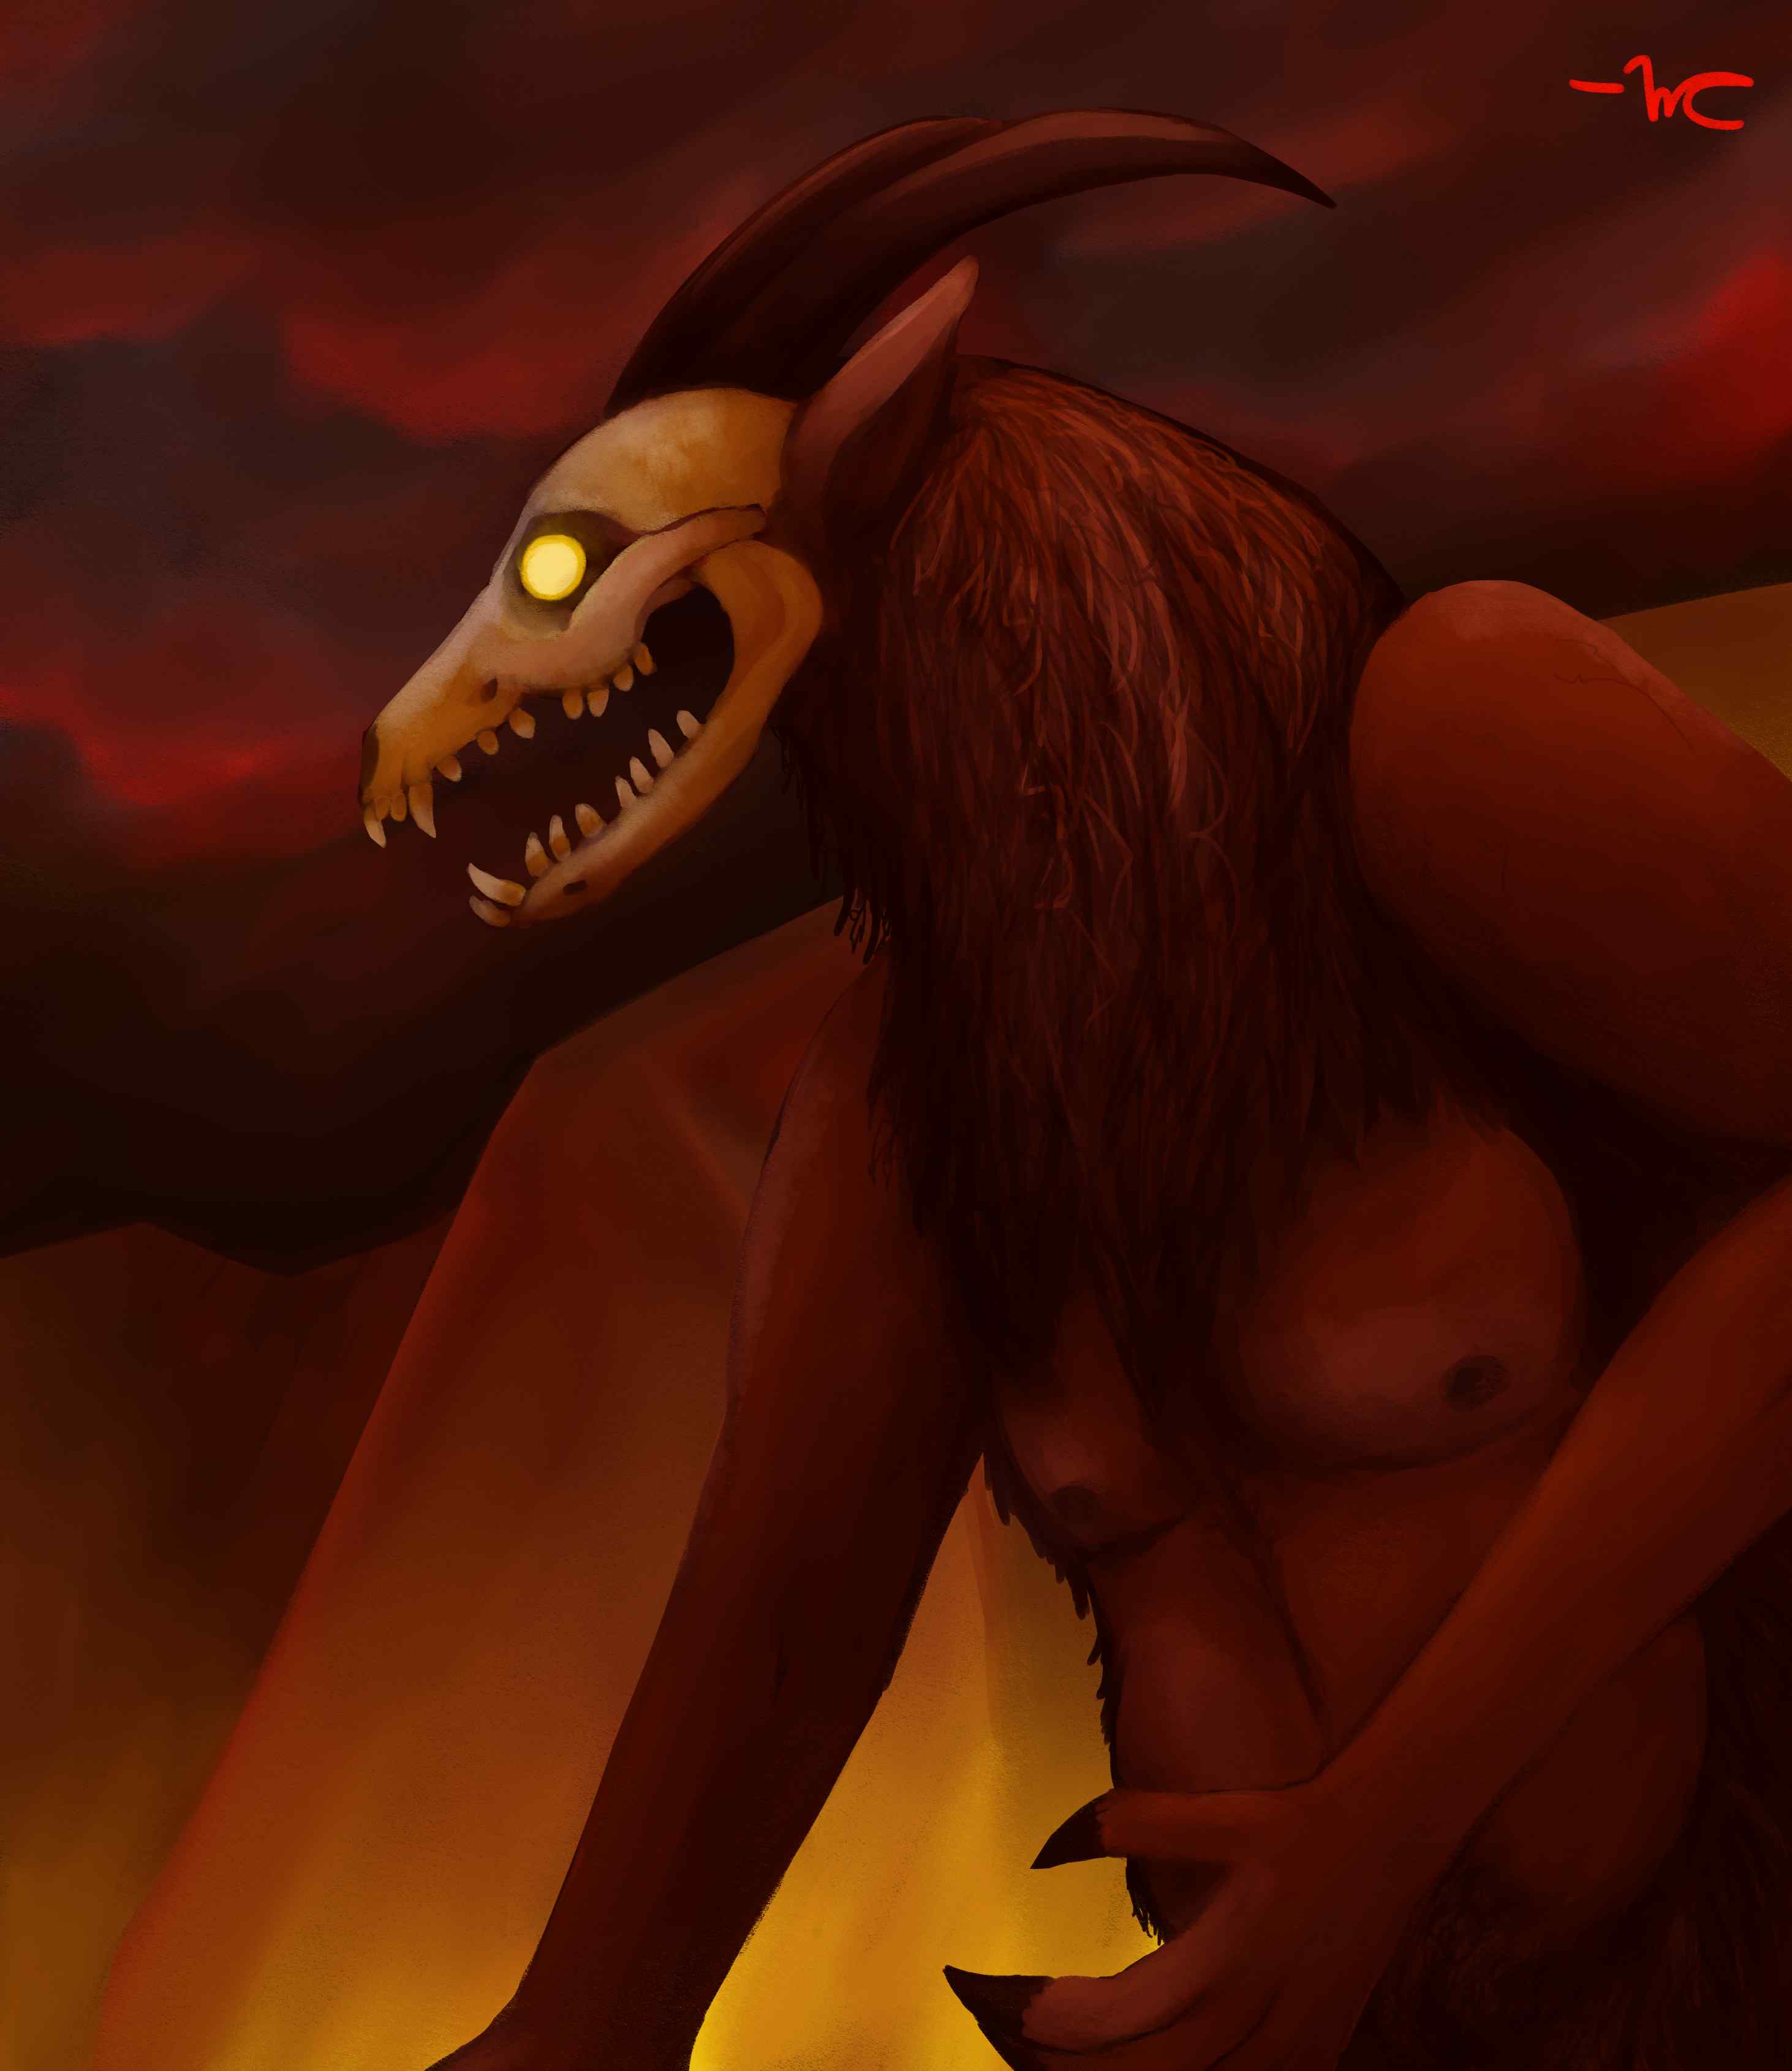 A red humanoid demon with an animal skull head. Behind it are red clouds and glowing warm mountains. The skull resembles a canine with goat horns, and glowing yellow eyes.